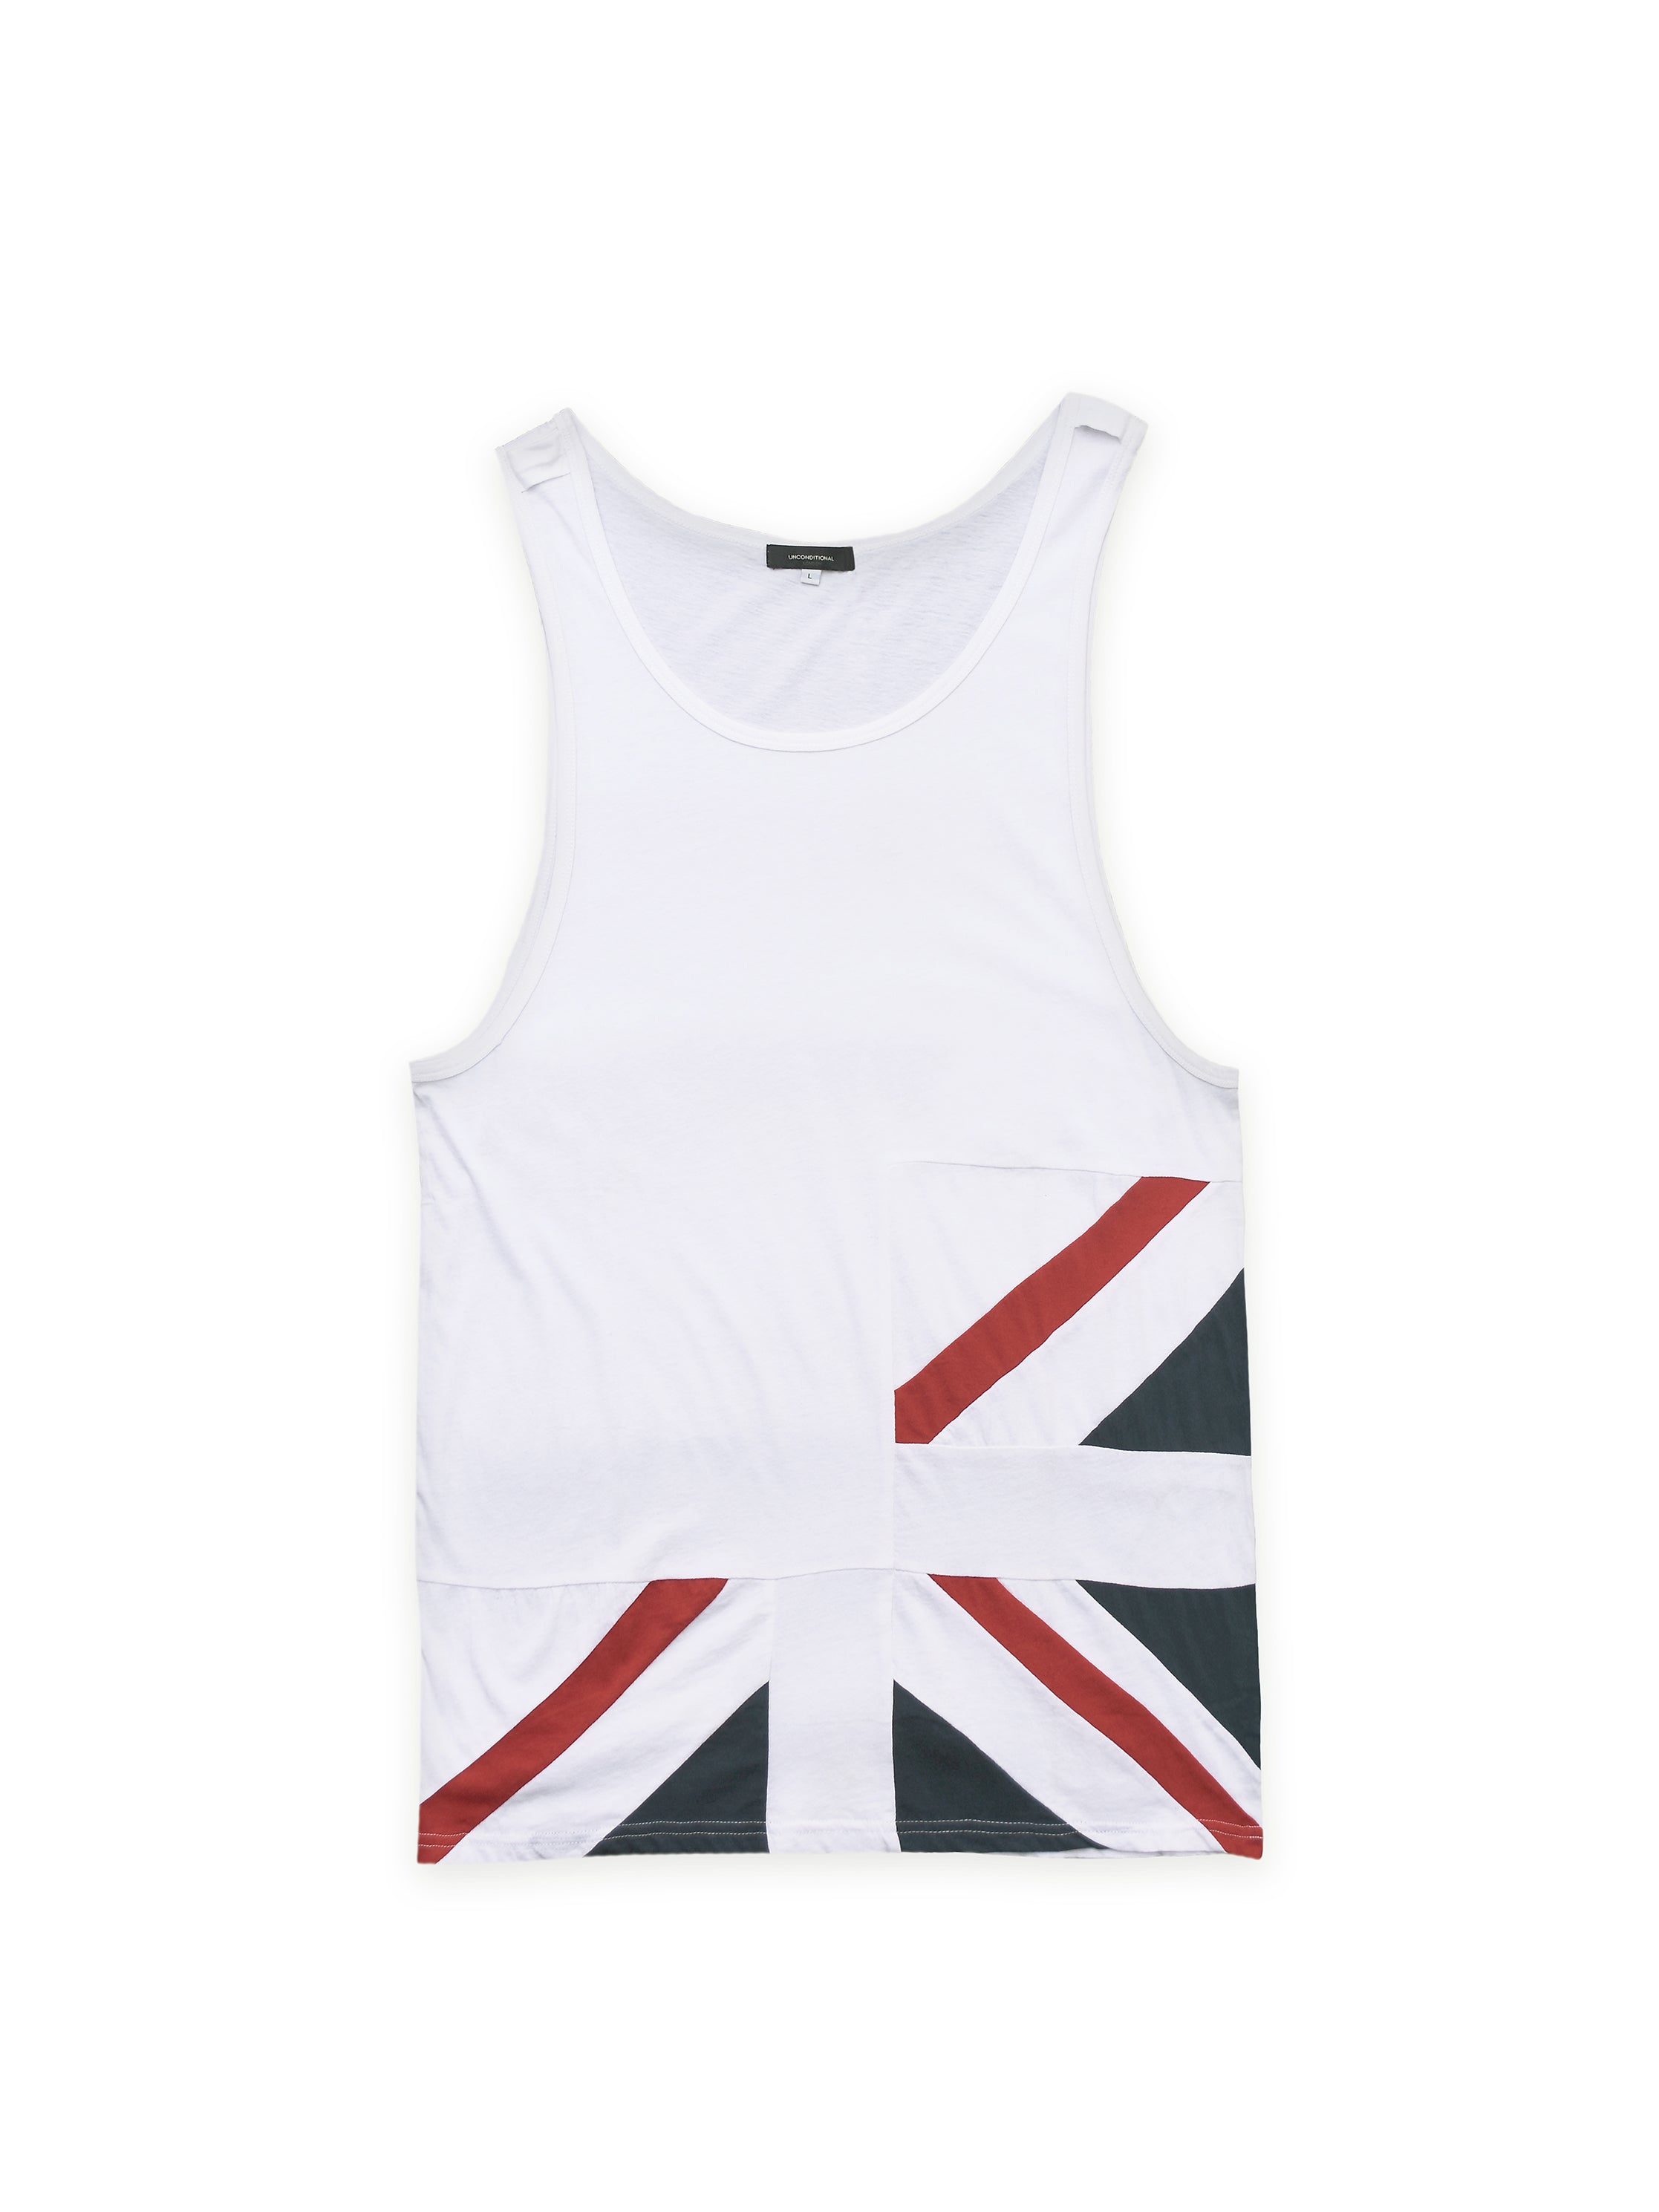 WHITE VEST WITH RED AND NAVY STRIPES